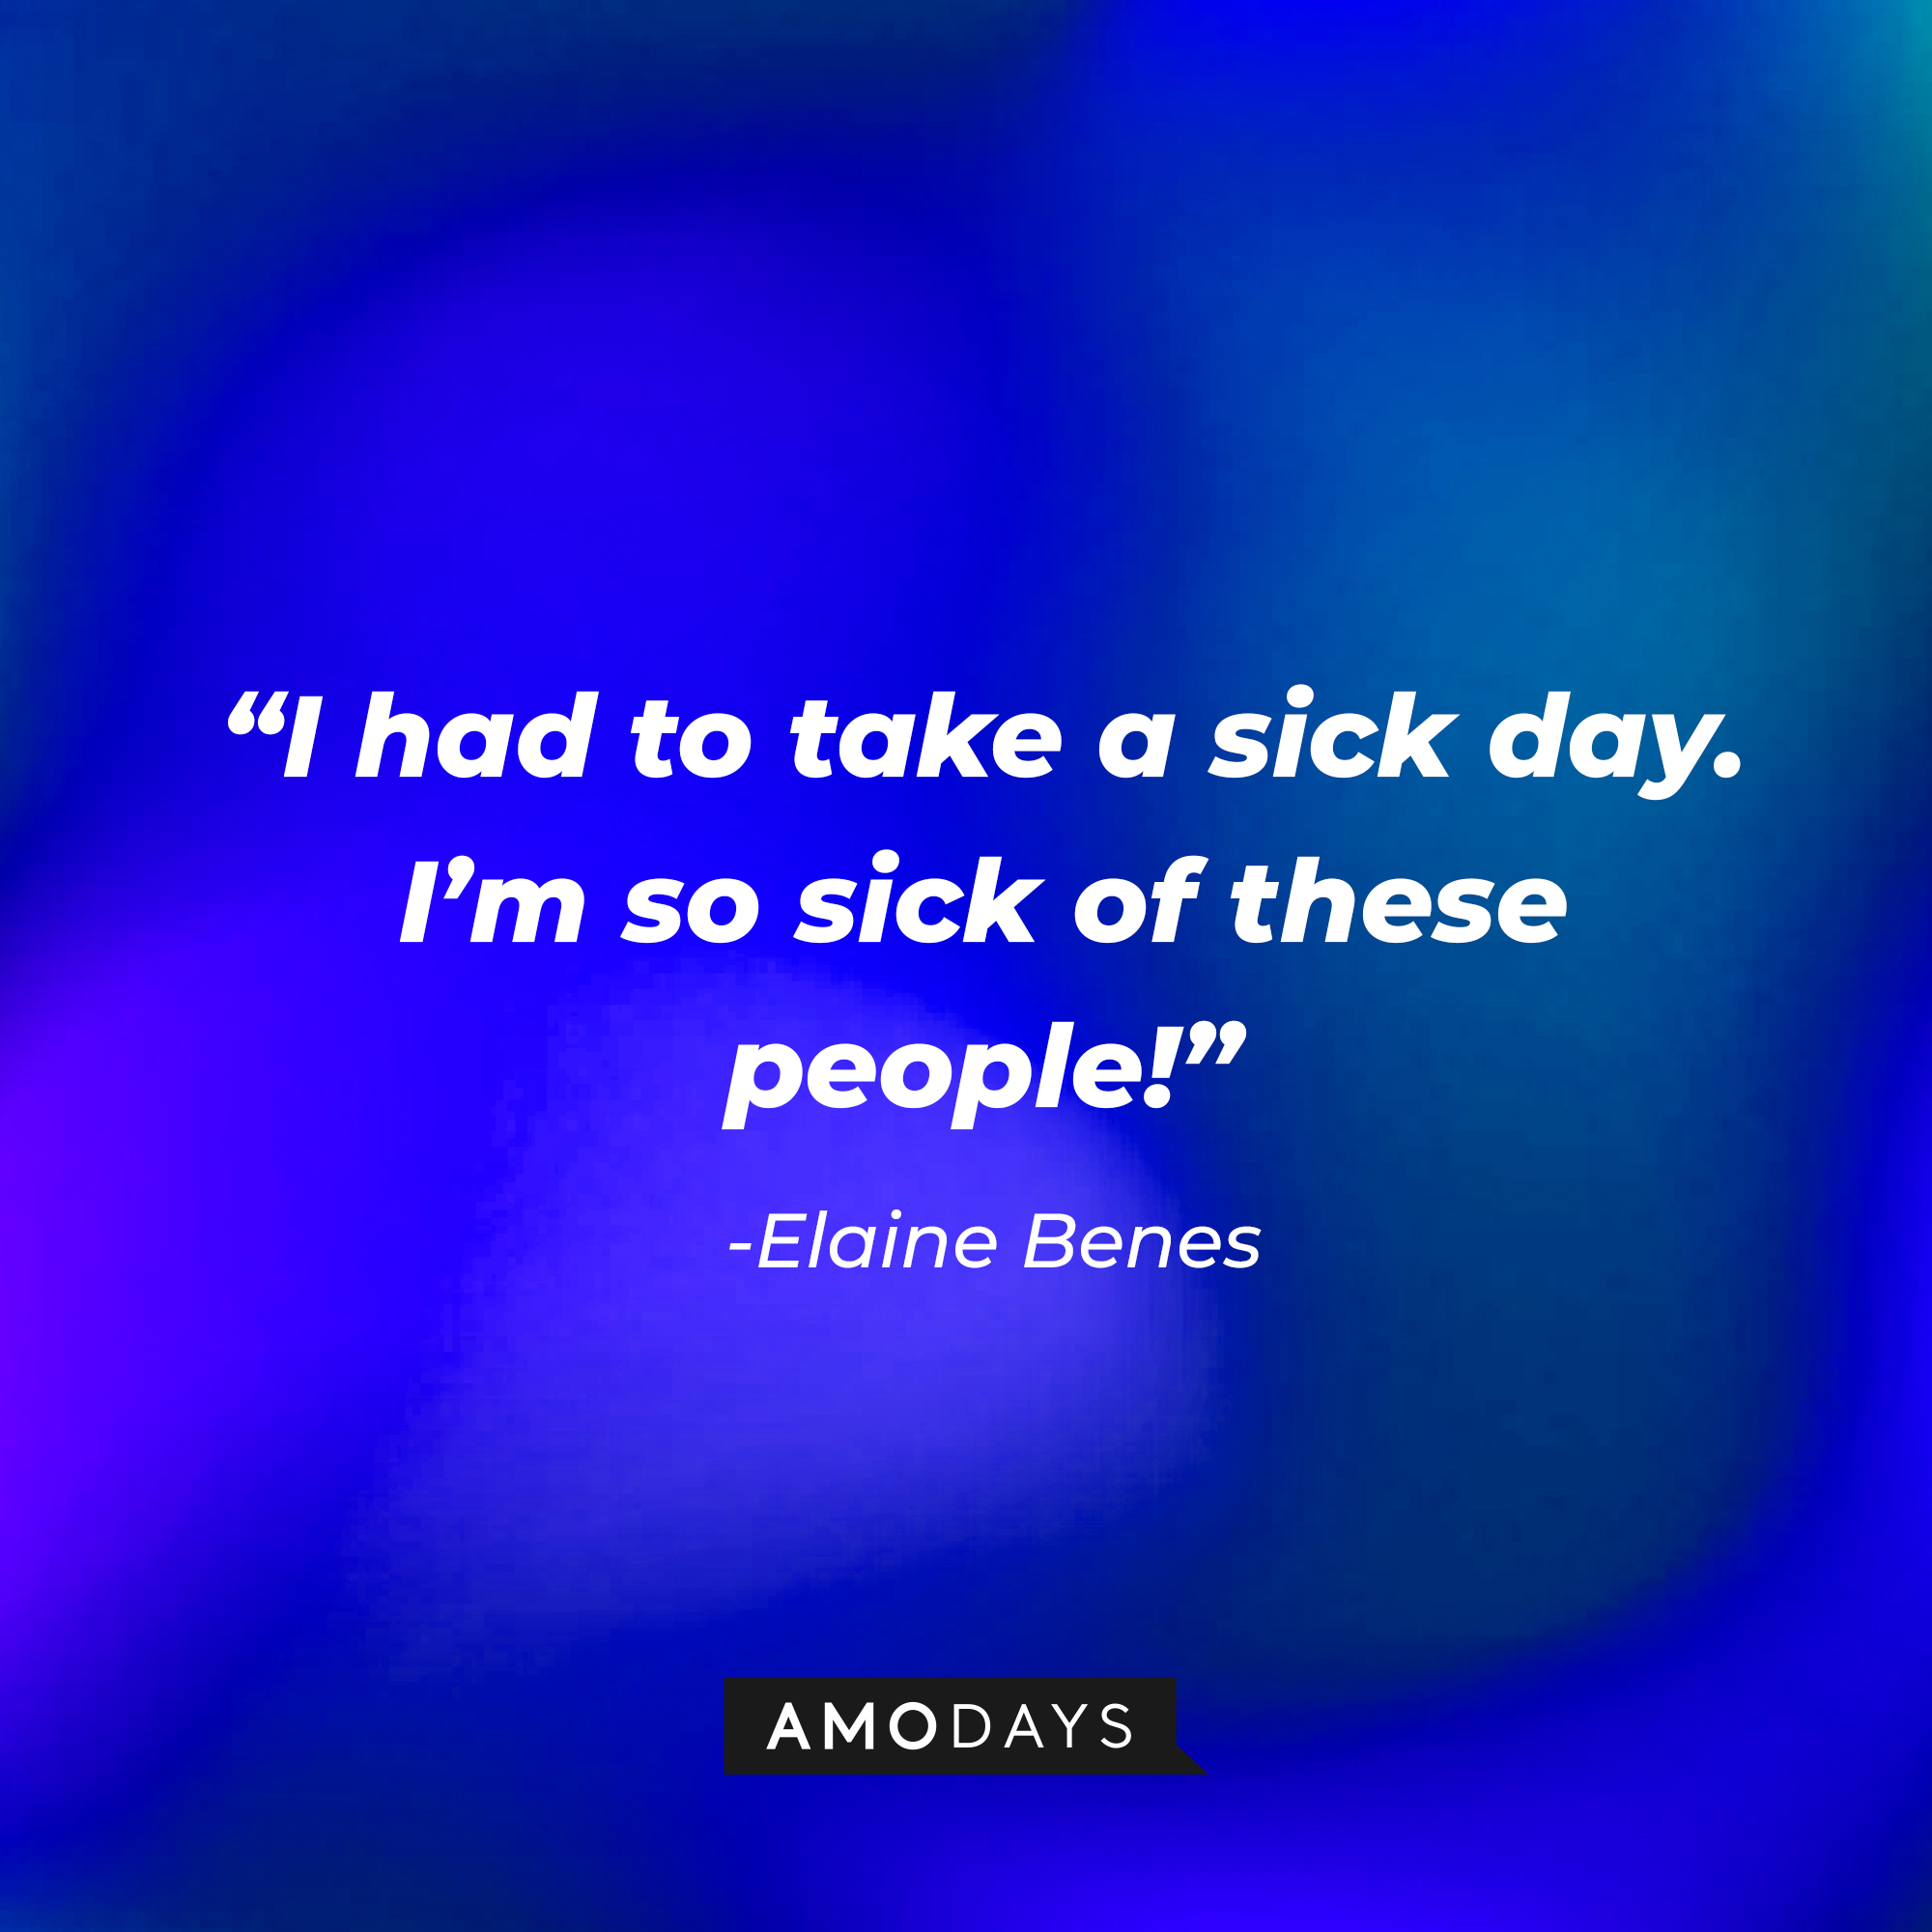 Elaine Benes quote: “I had to take a sick day. I’m so sick of these people!” | Source: Amodays